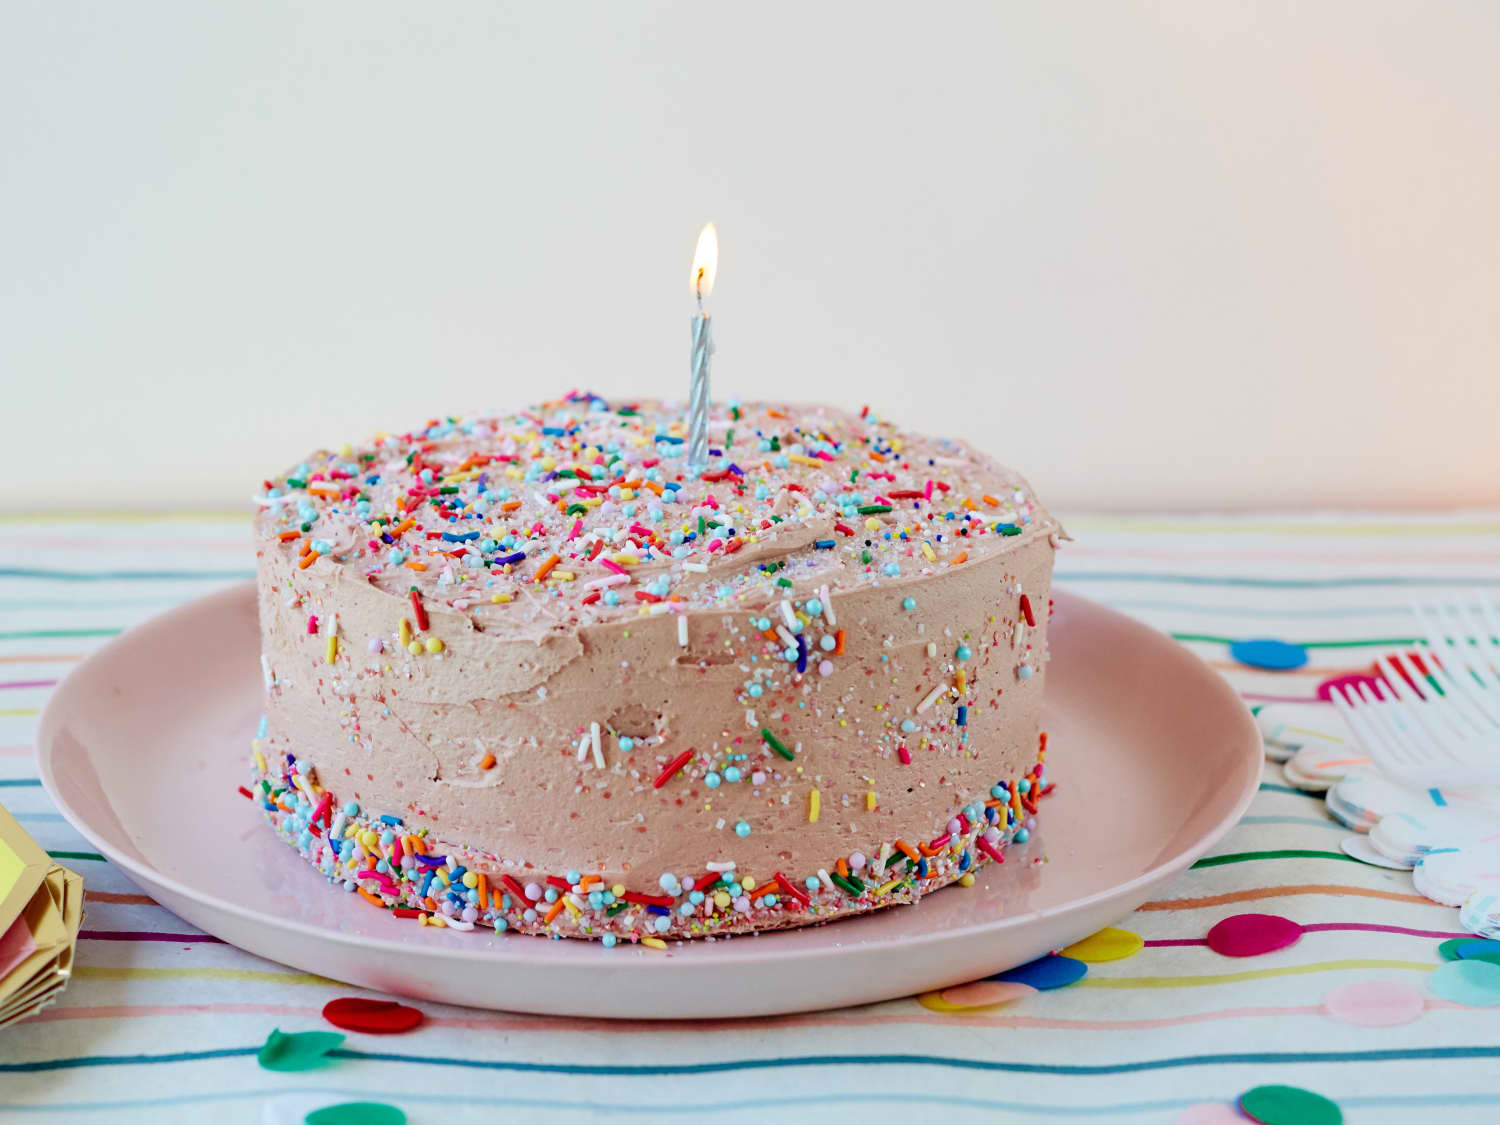 How To Make Classic Birthday Cake | The Kitchn